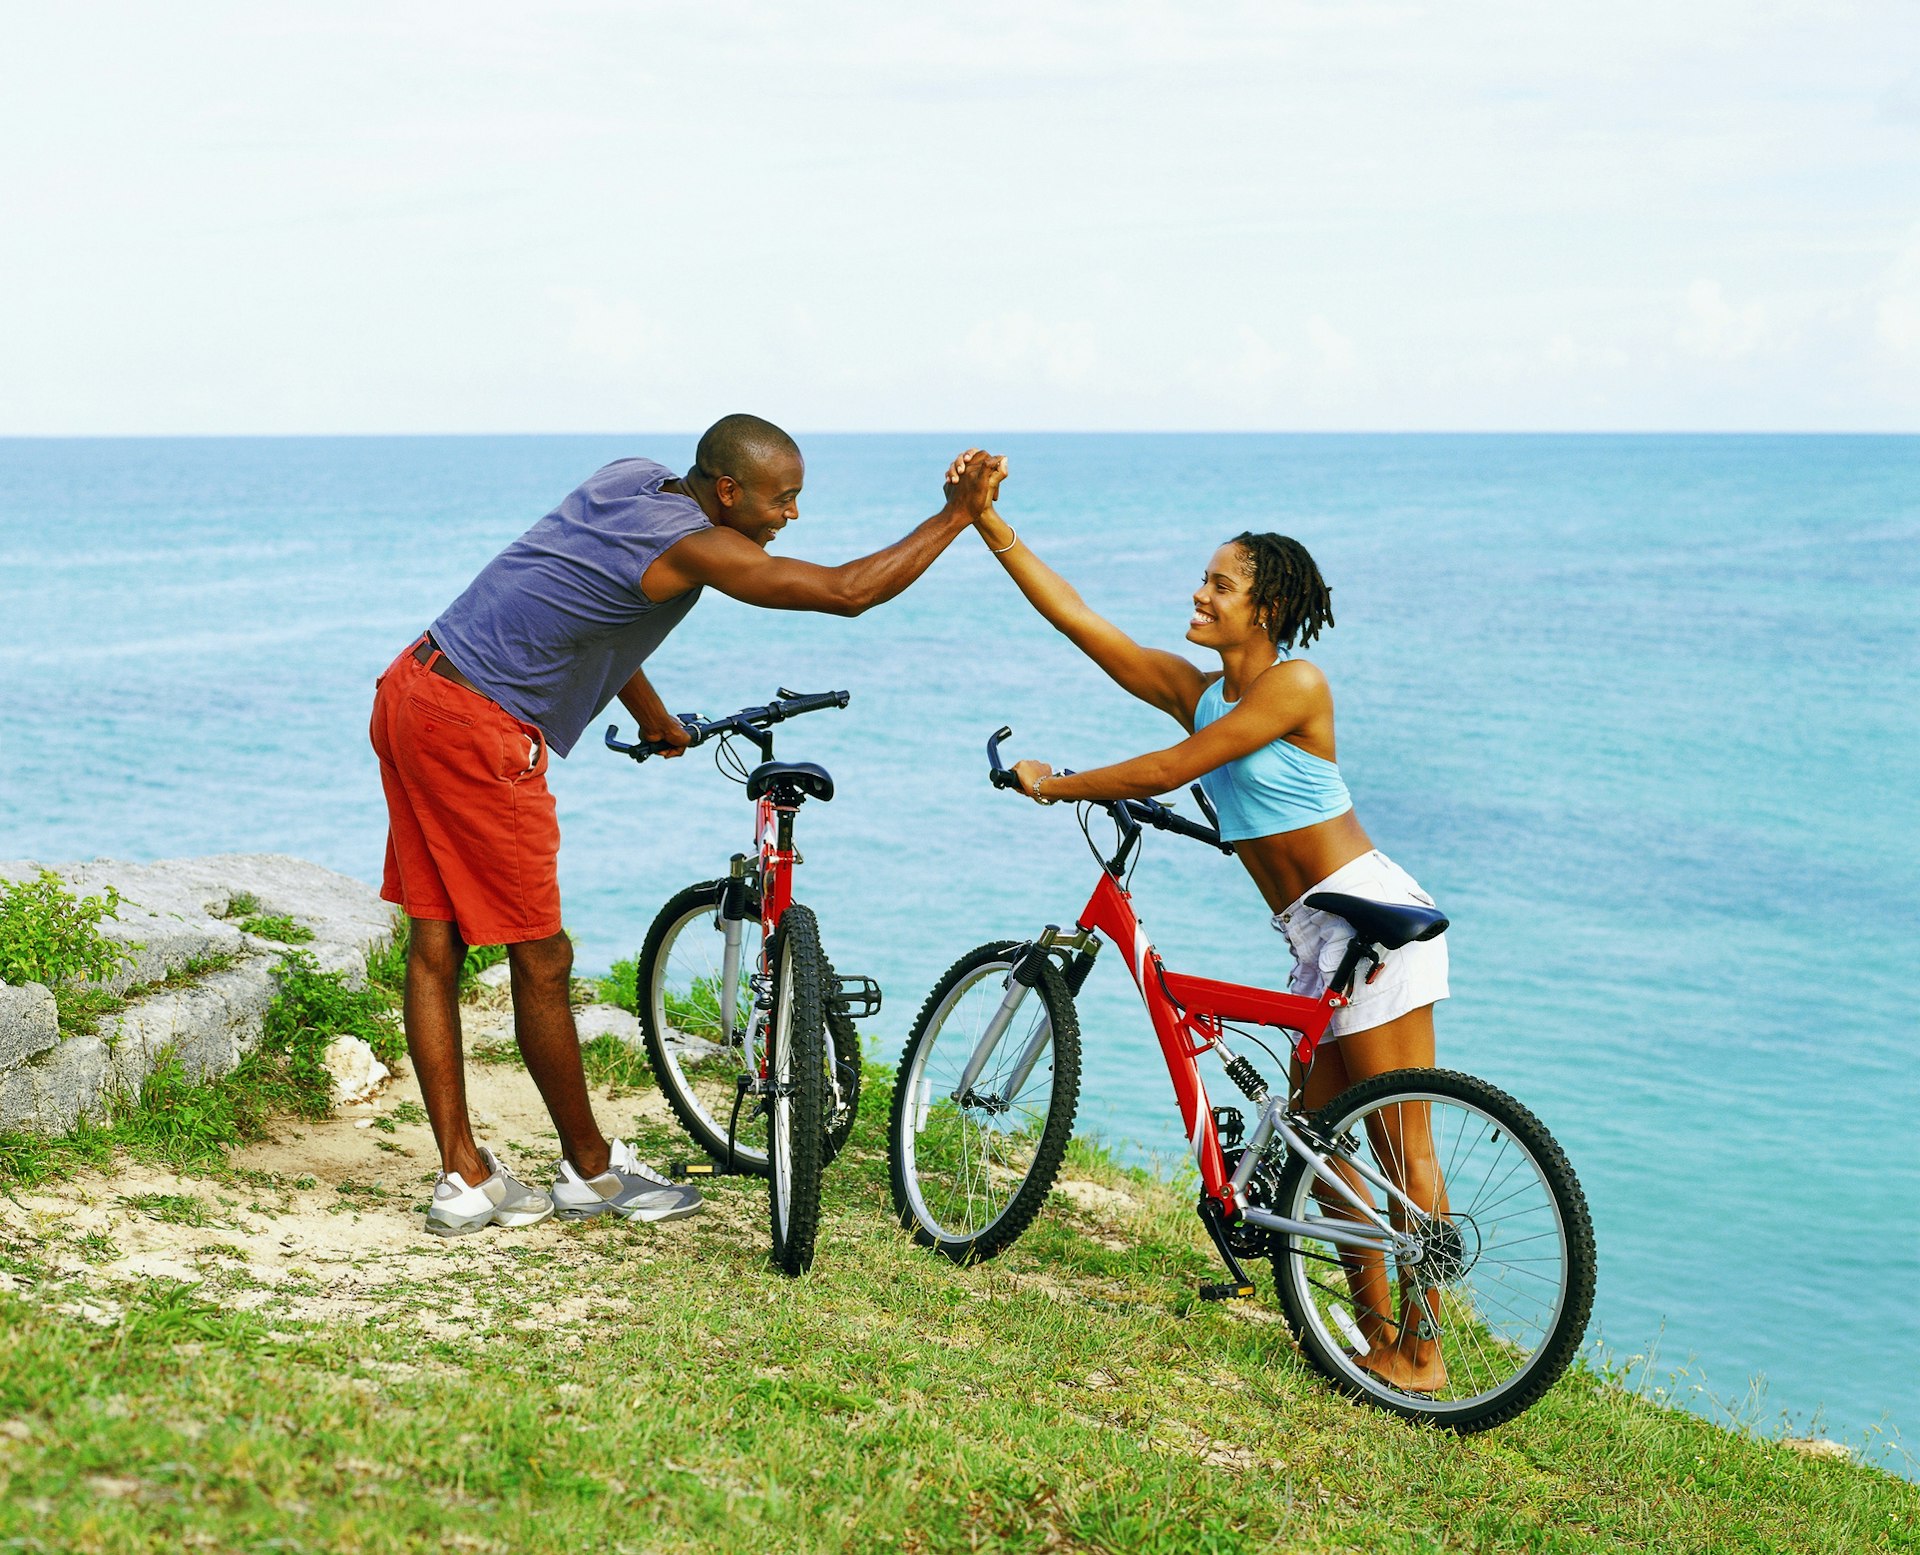 A couple celebrate cycling to the top of a green hill overlooking the sea in Bermuda